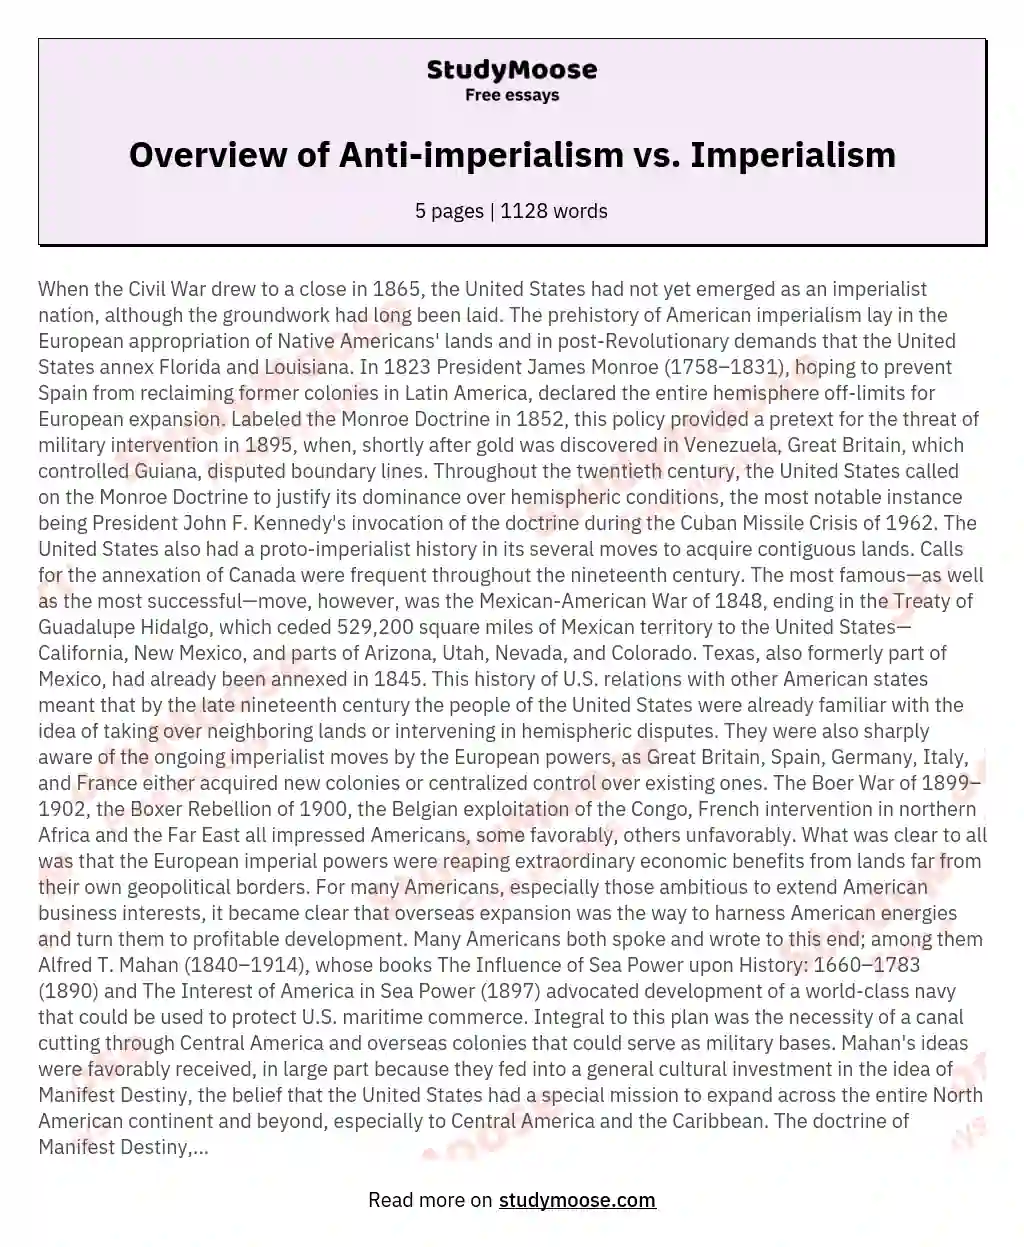 Overview of Anti-imperialism vs. Imperialism essay